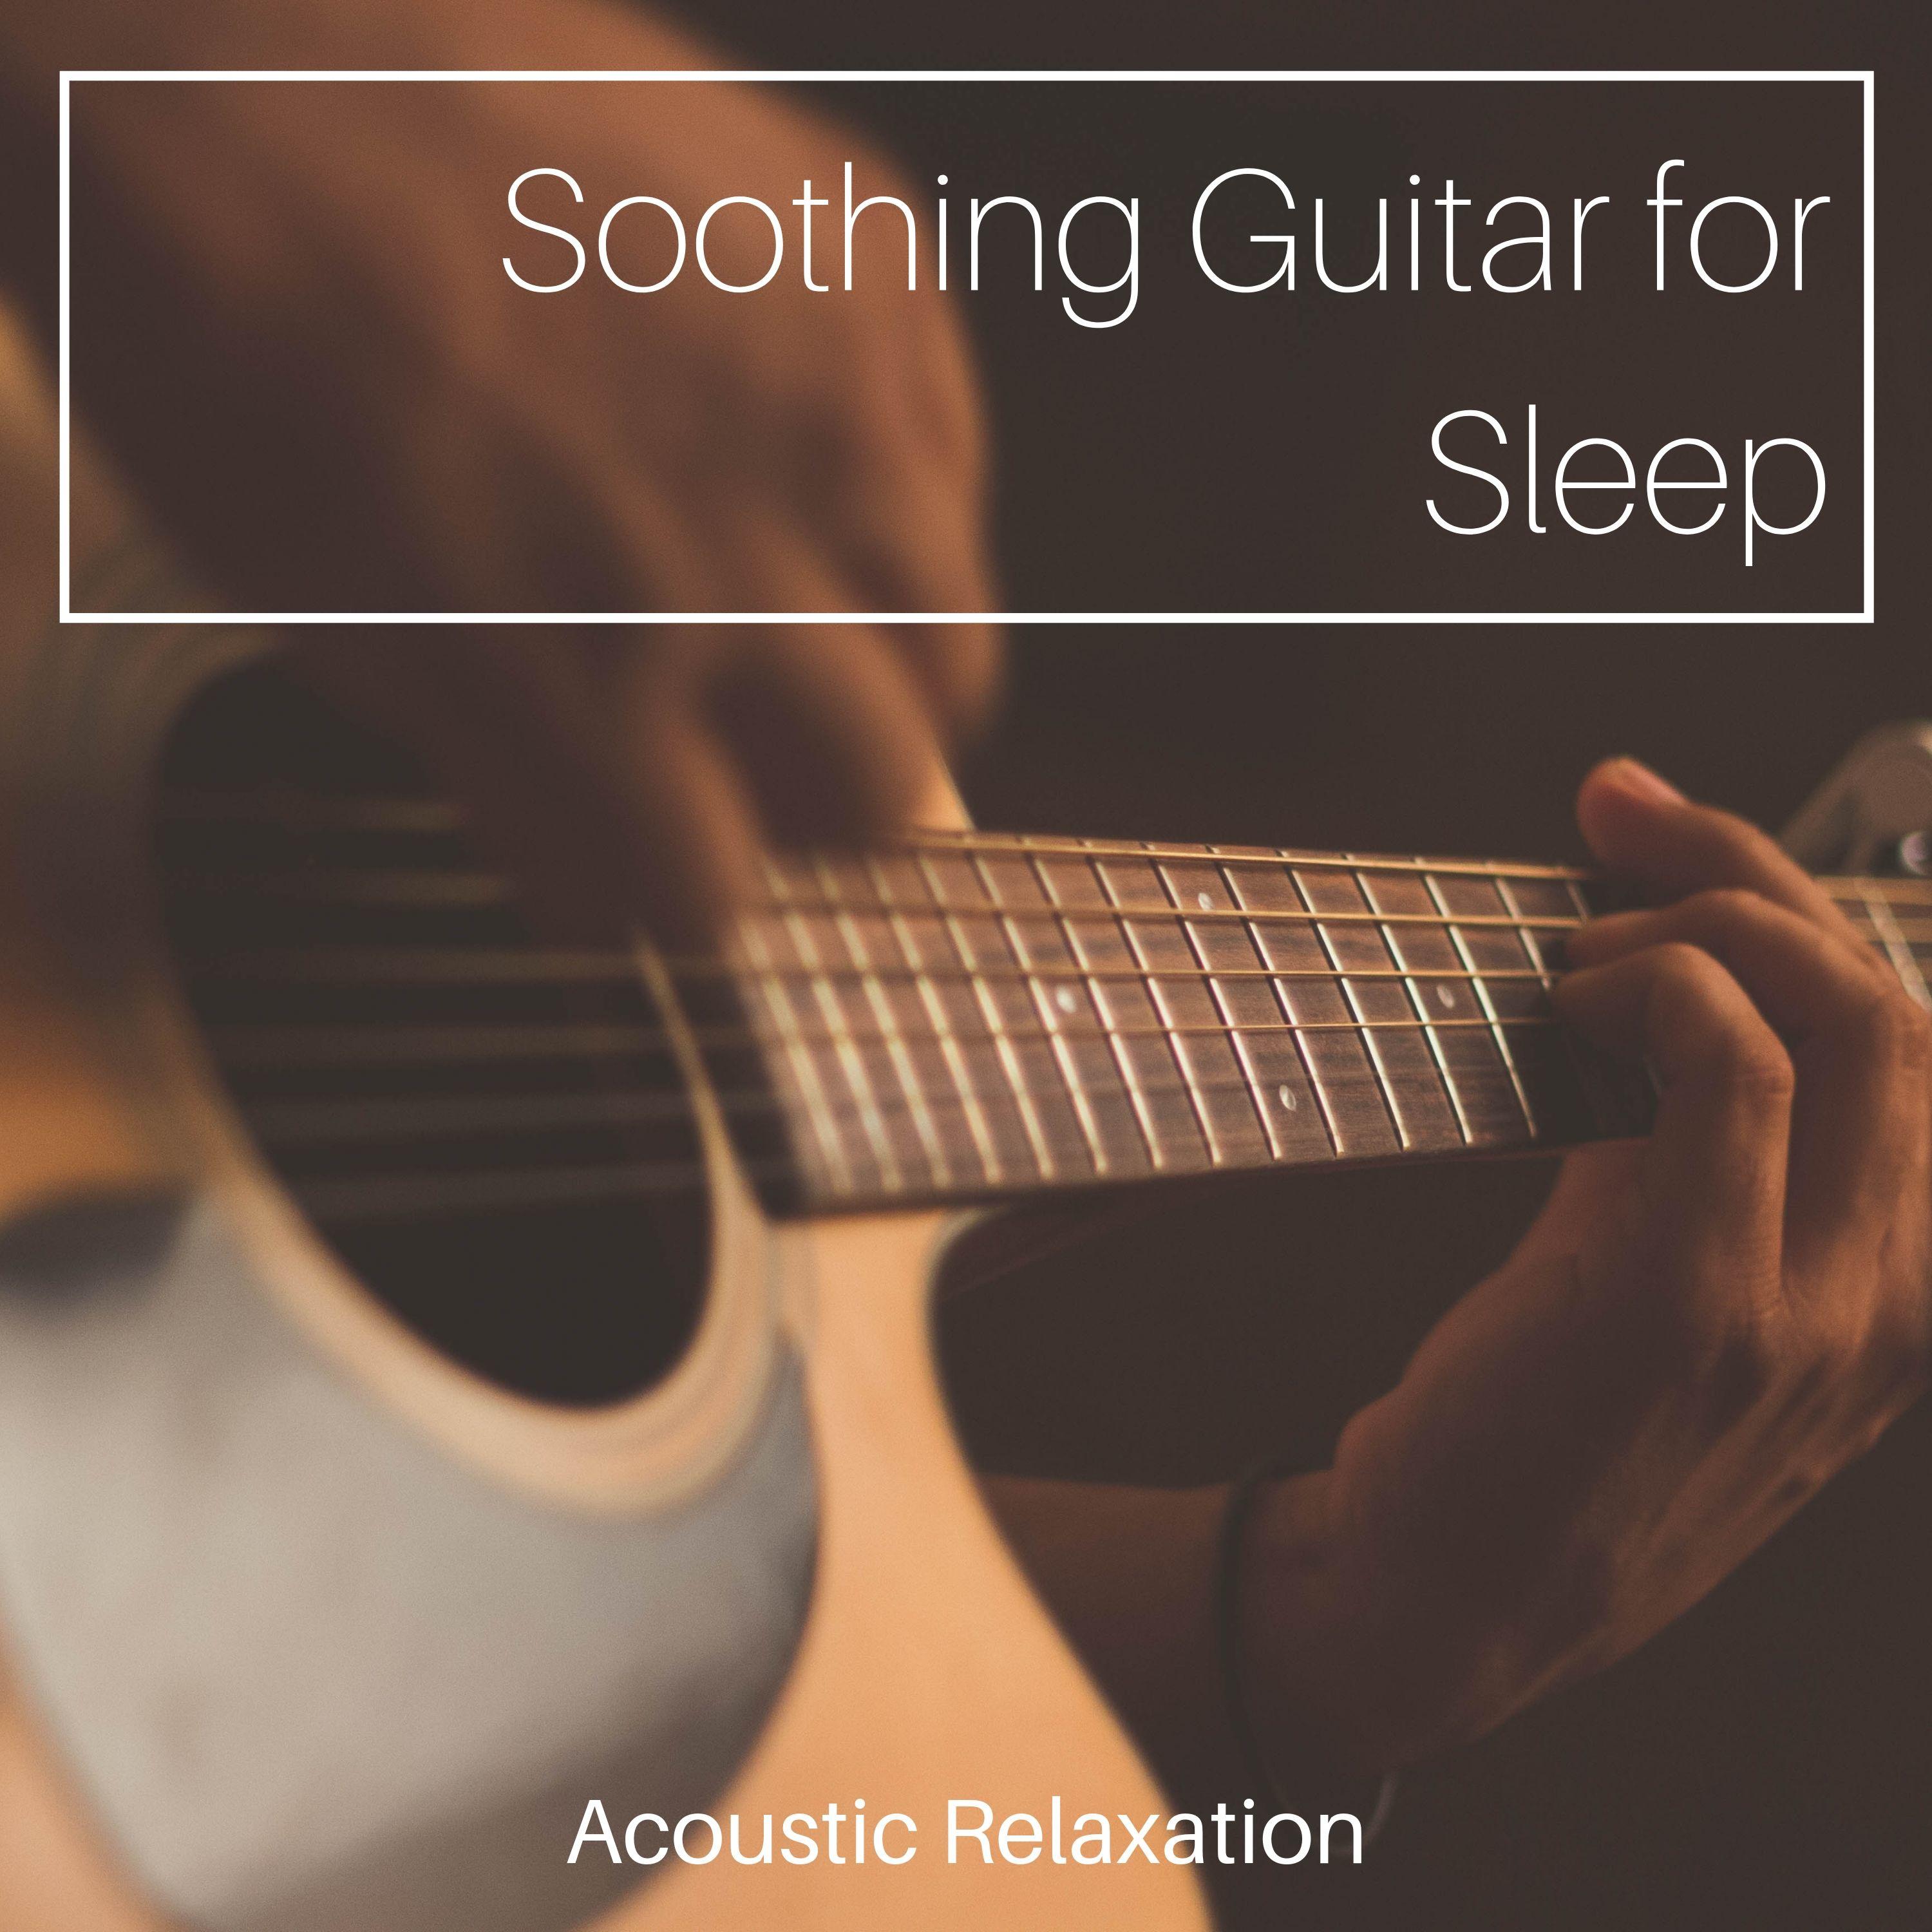 Soothing Guitar for Sleep: Acoustic Relaxation